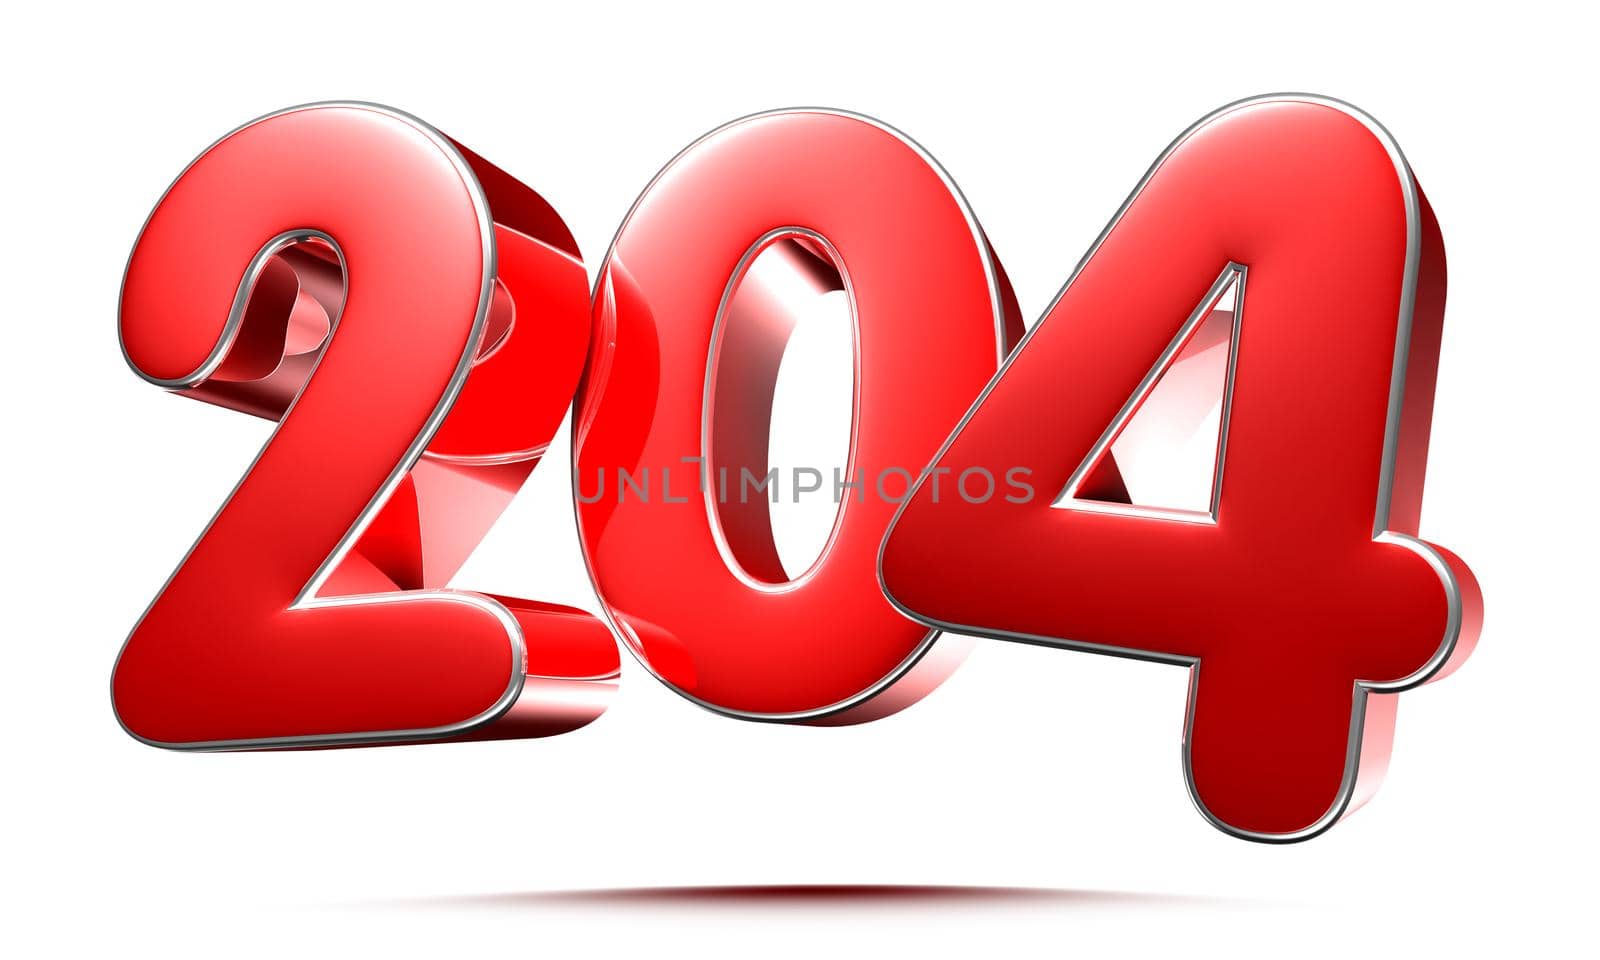 Rounded red numbers 204 on white background 3D illustration with clipping path